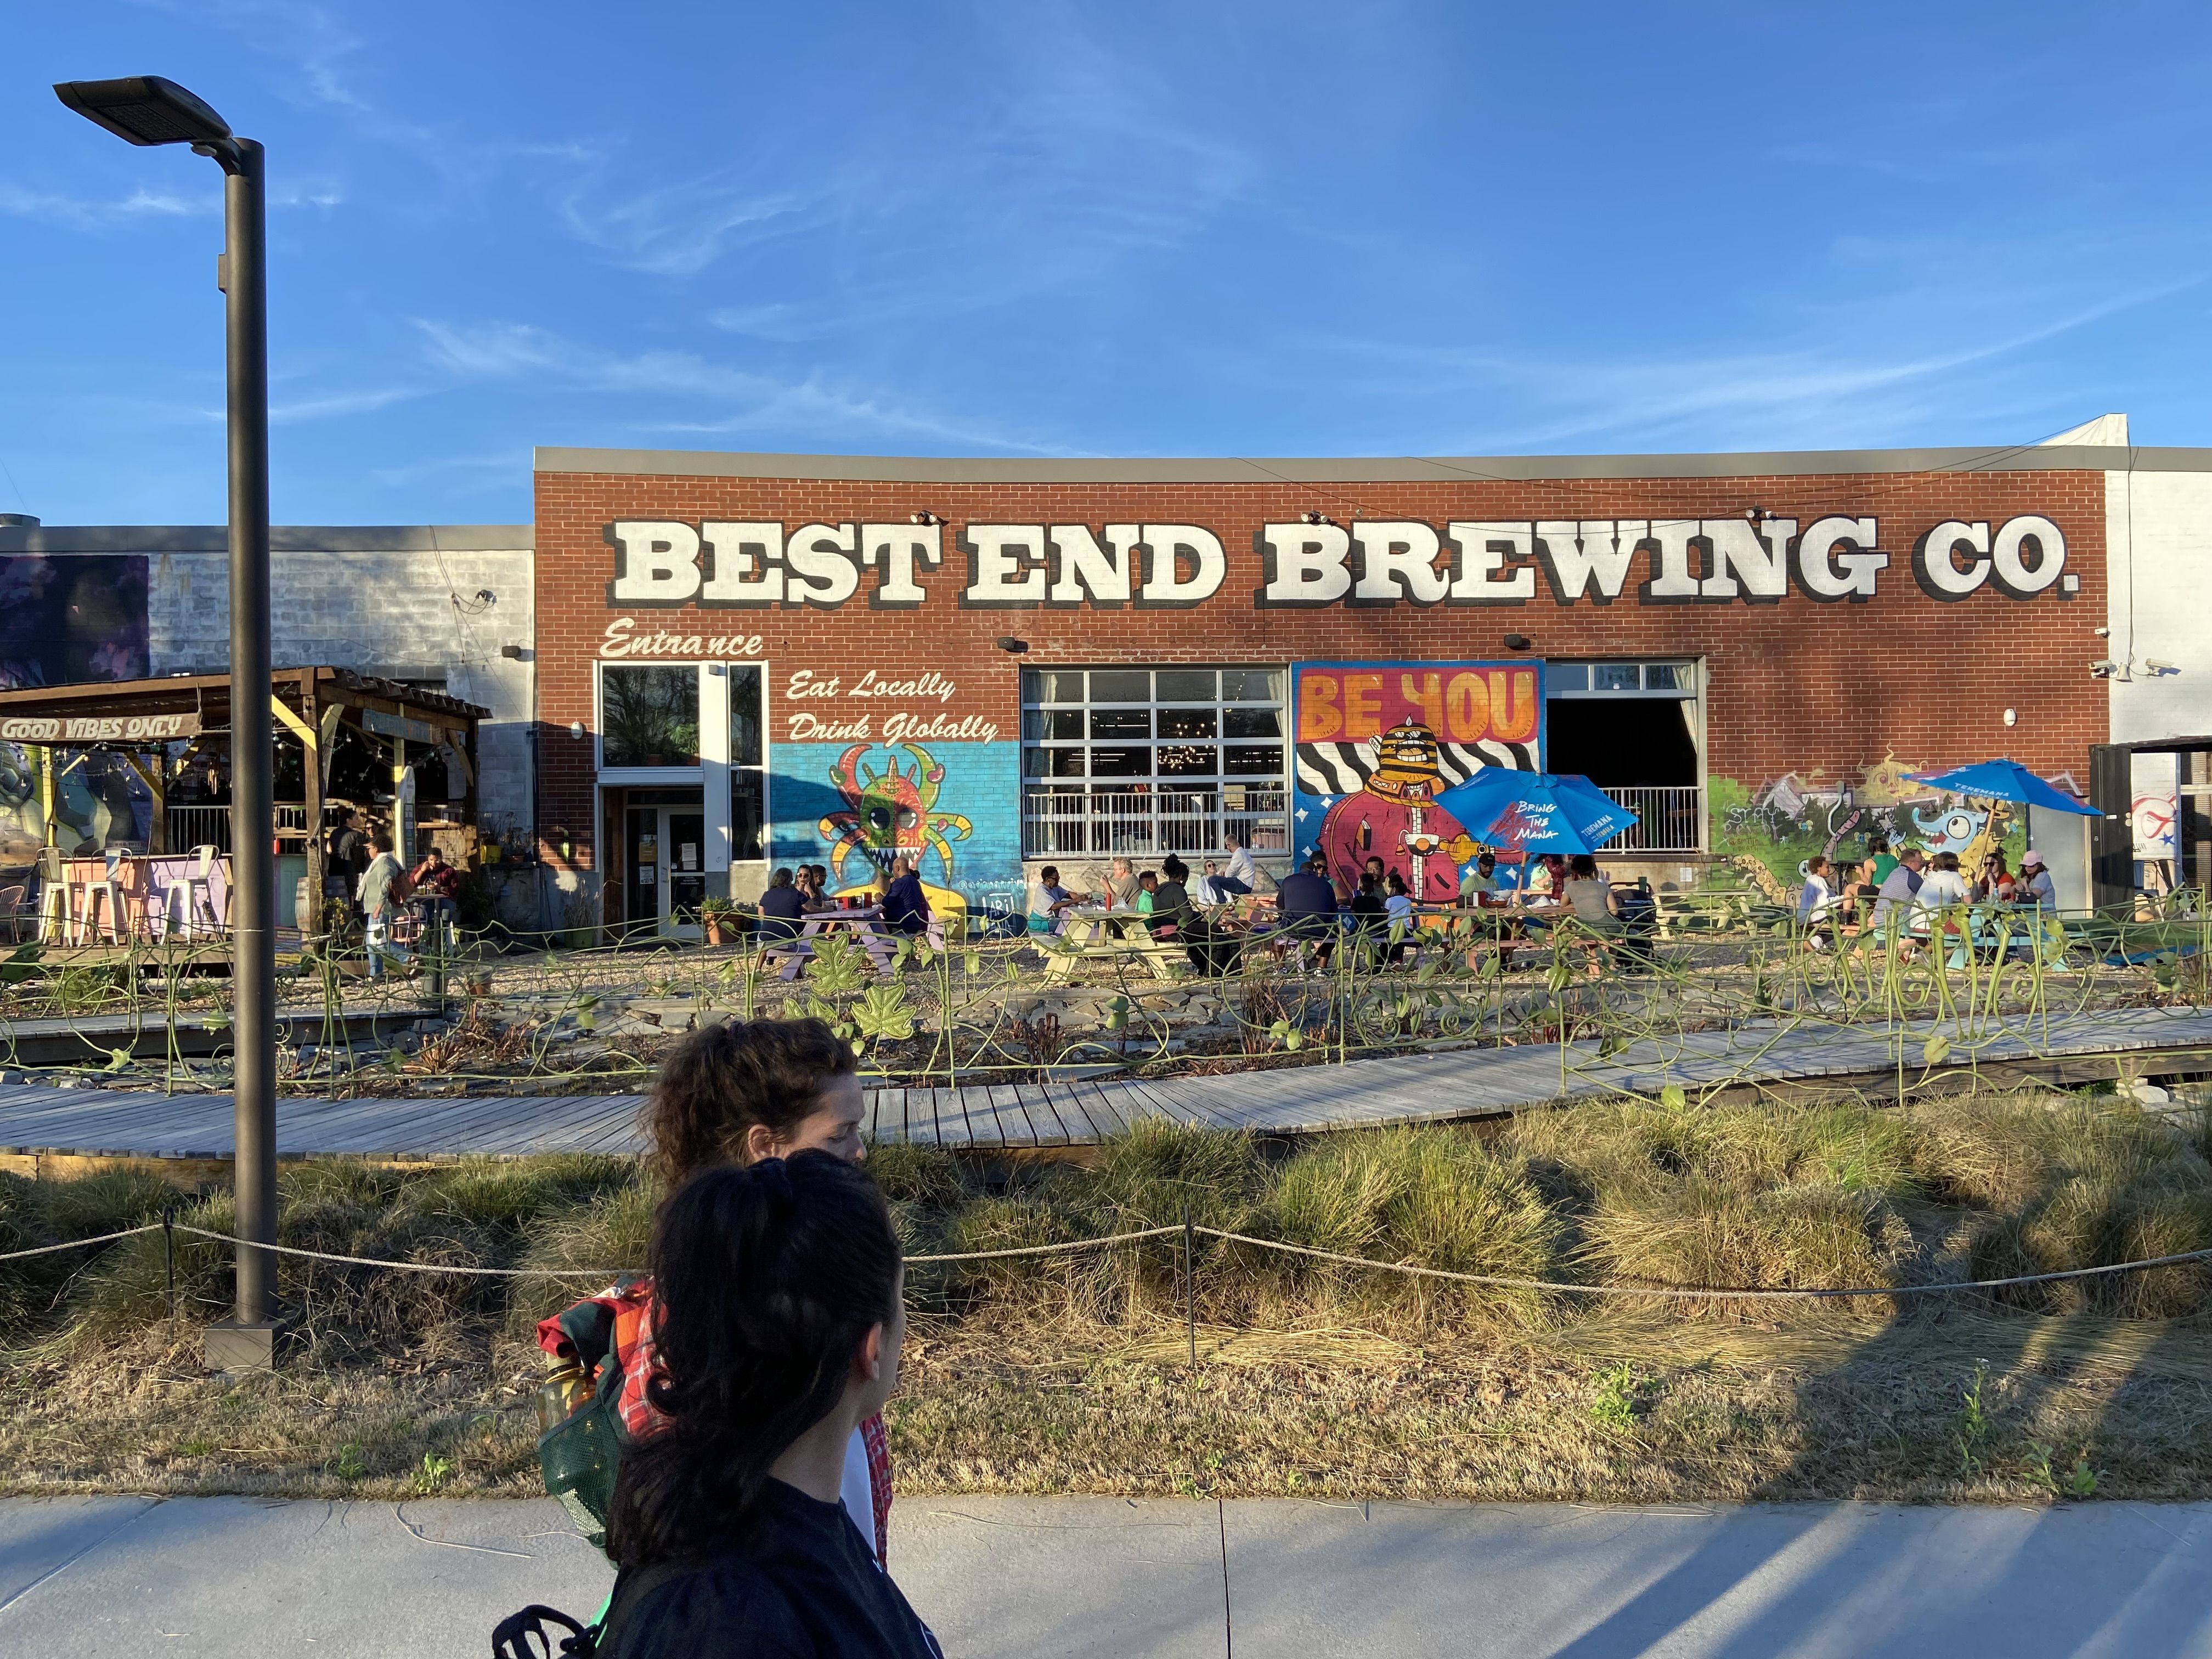 Two people walk on a paved bike and pedestrian trail in front of a building with "BEST END BREWING" in capital letters